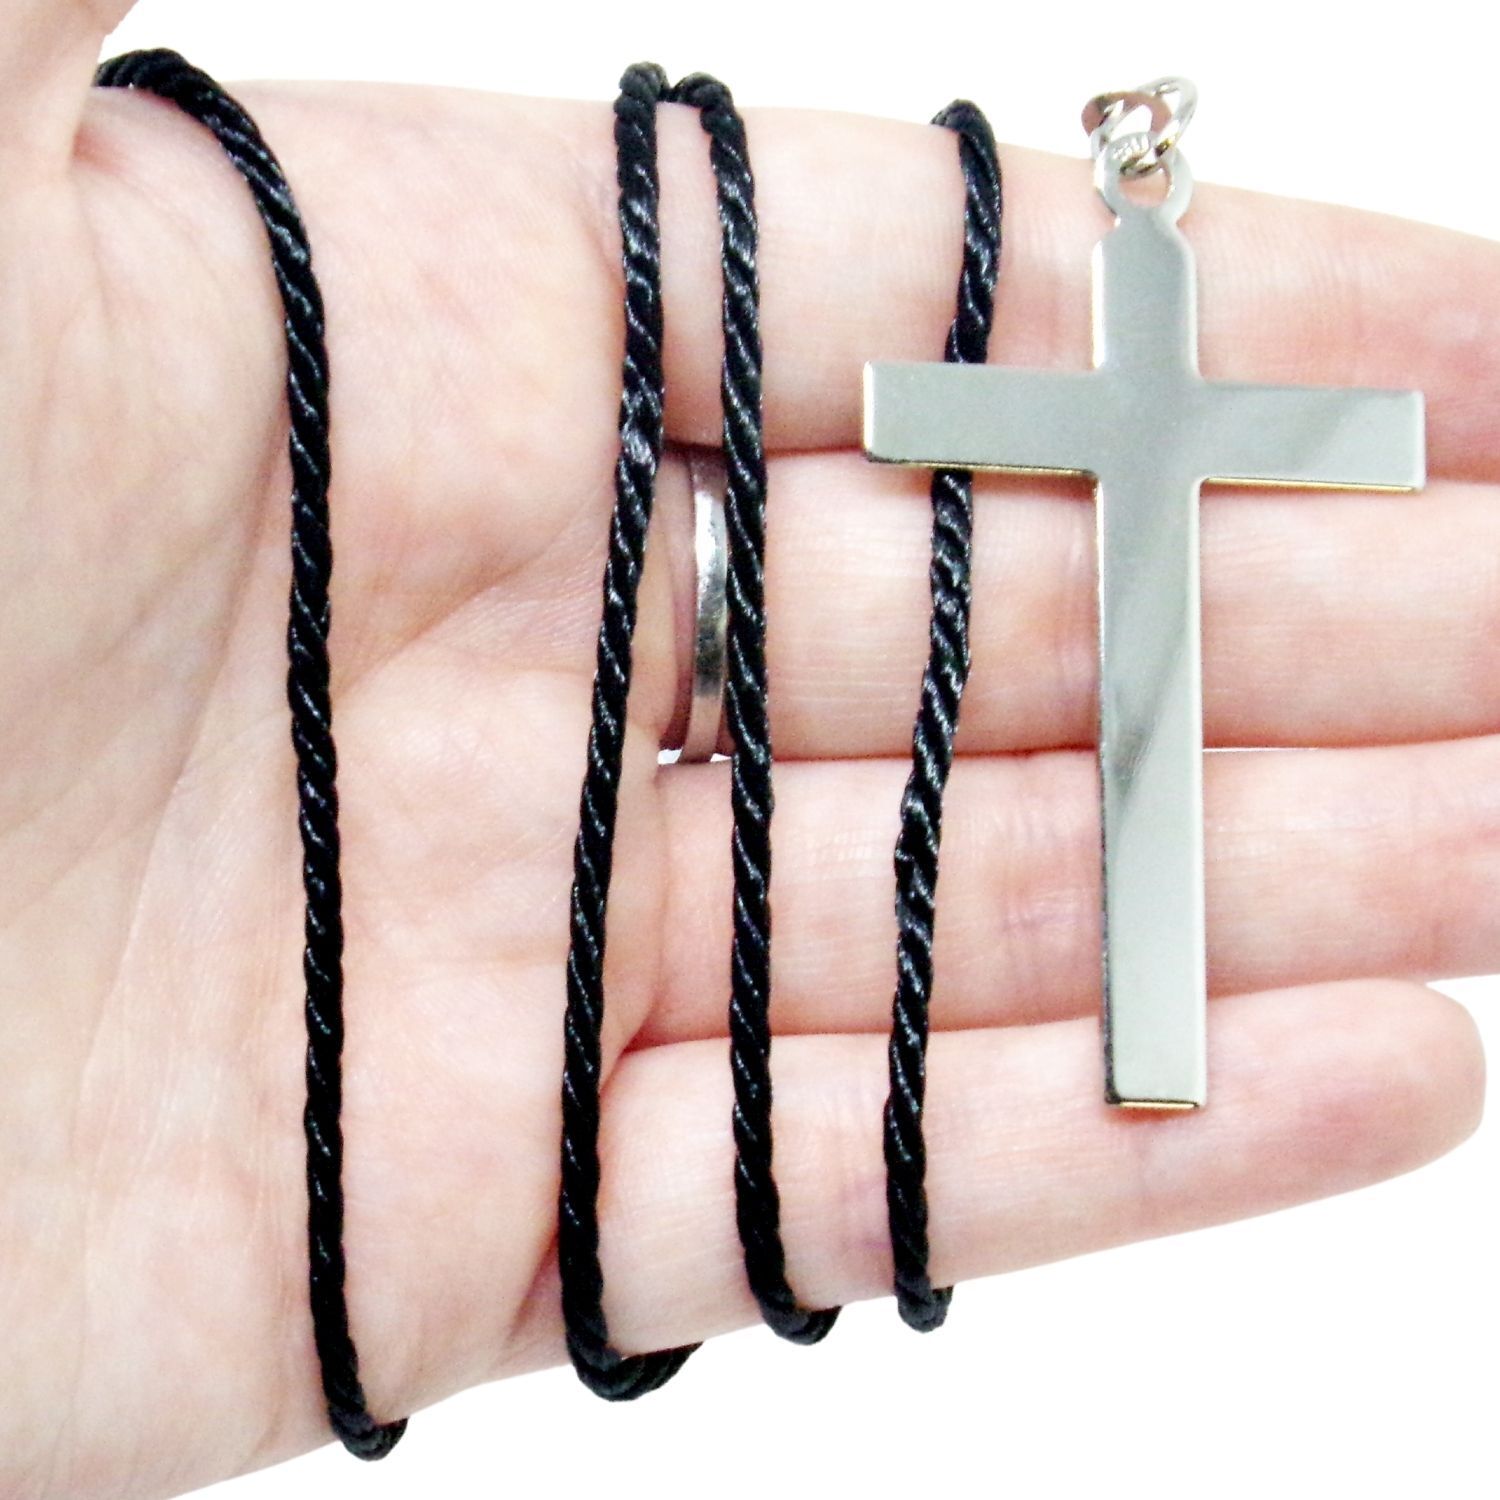 Silver Tone Plain Metal Cross Pendant Medal on Cord Necklace Gift 2 1/4 Inch